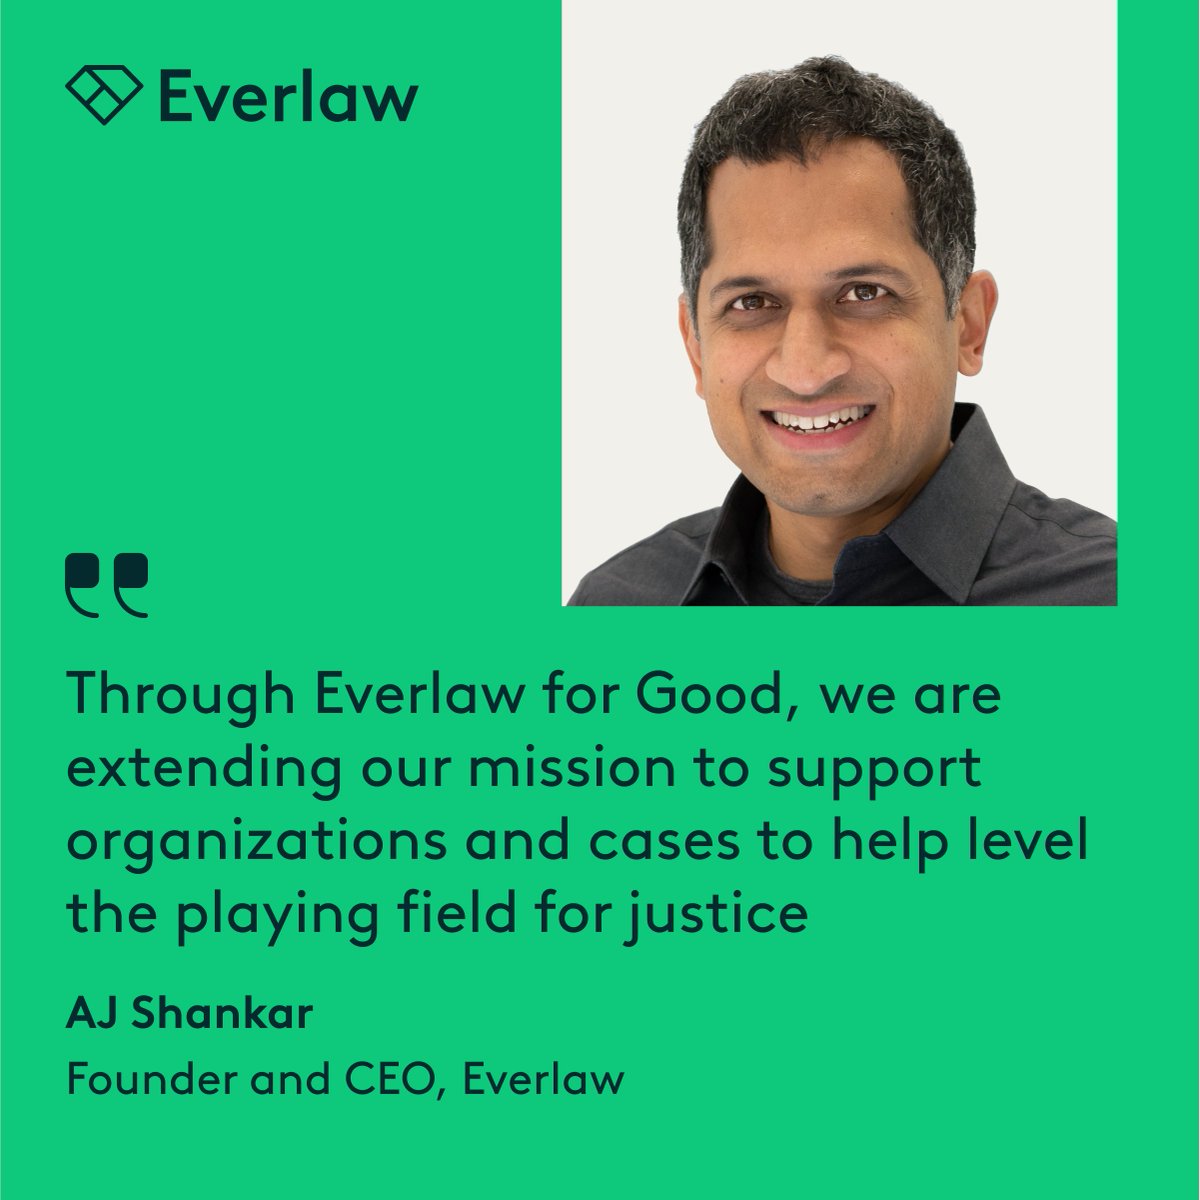 .@Everlaw expands its Everlaw for Good Program to level the playing field for justice, with a goal of $1M of in-kind services this year, includes access to Everlaw’s GenAI – Everlaw AI Assistant! Read more > businesswire.com/news/home/2024… #EverlawForGood #Justice #GenAI